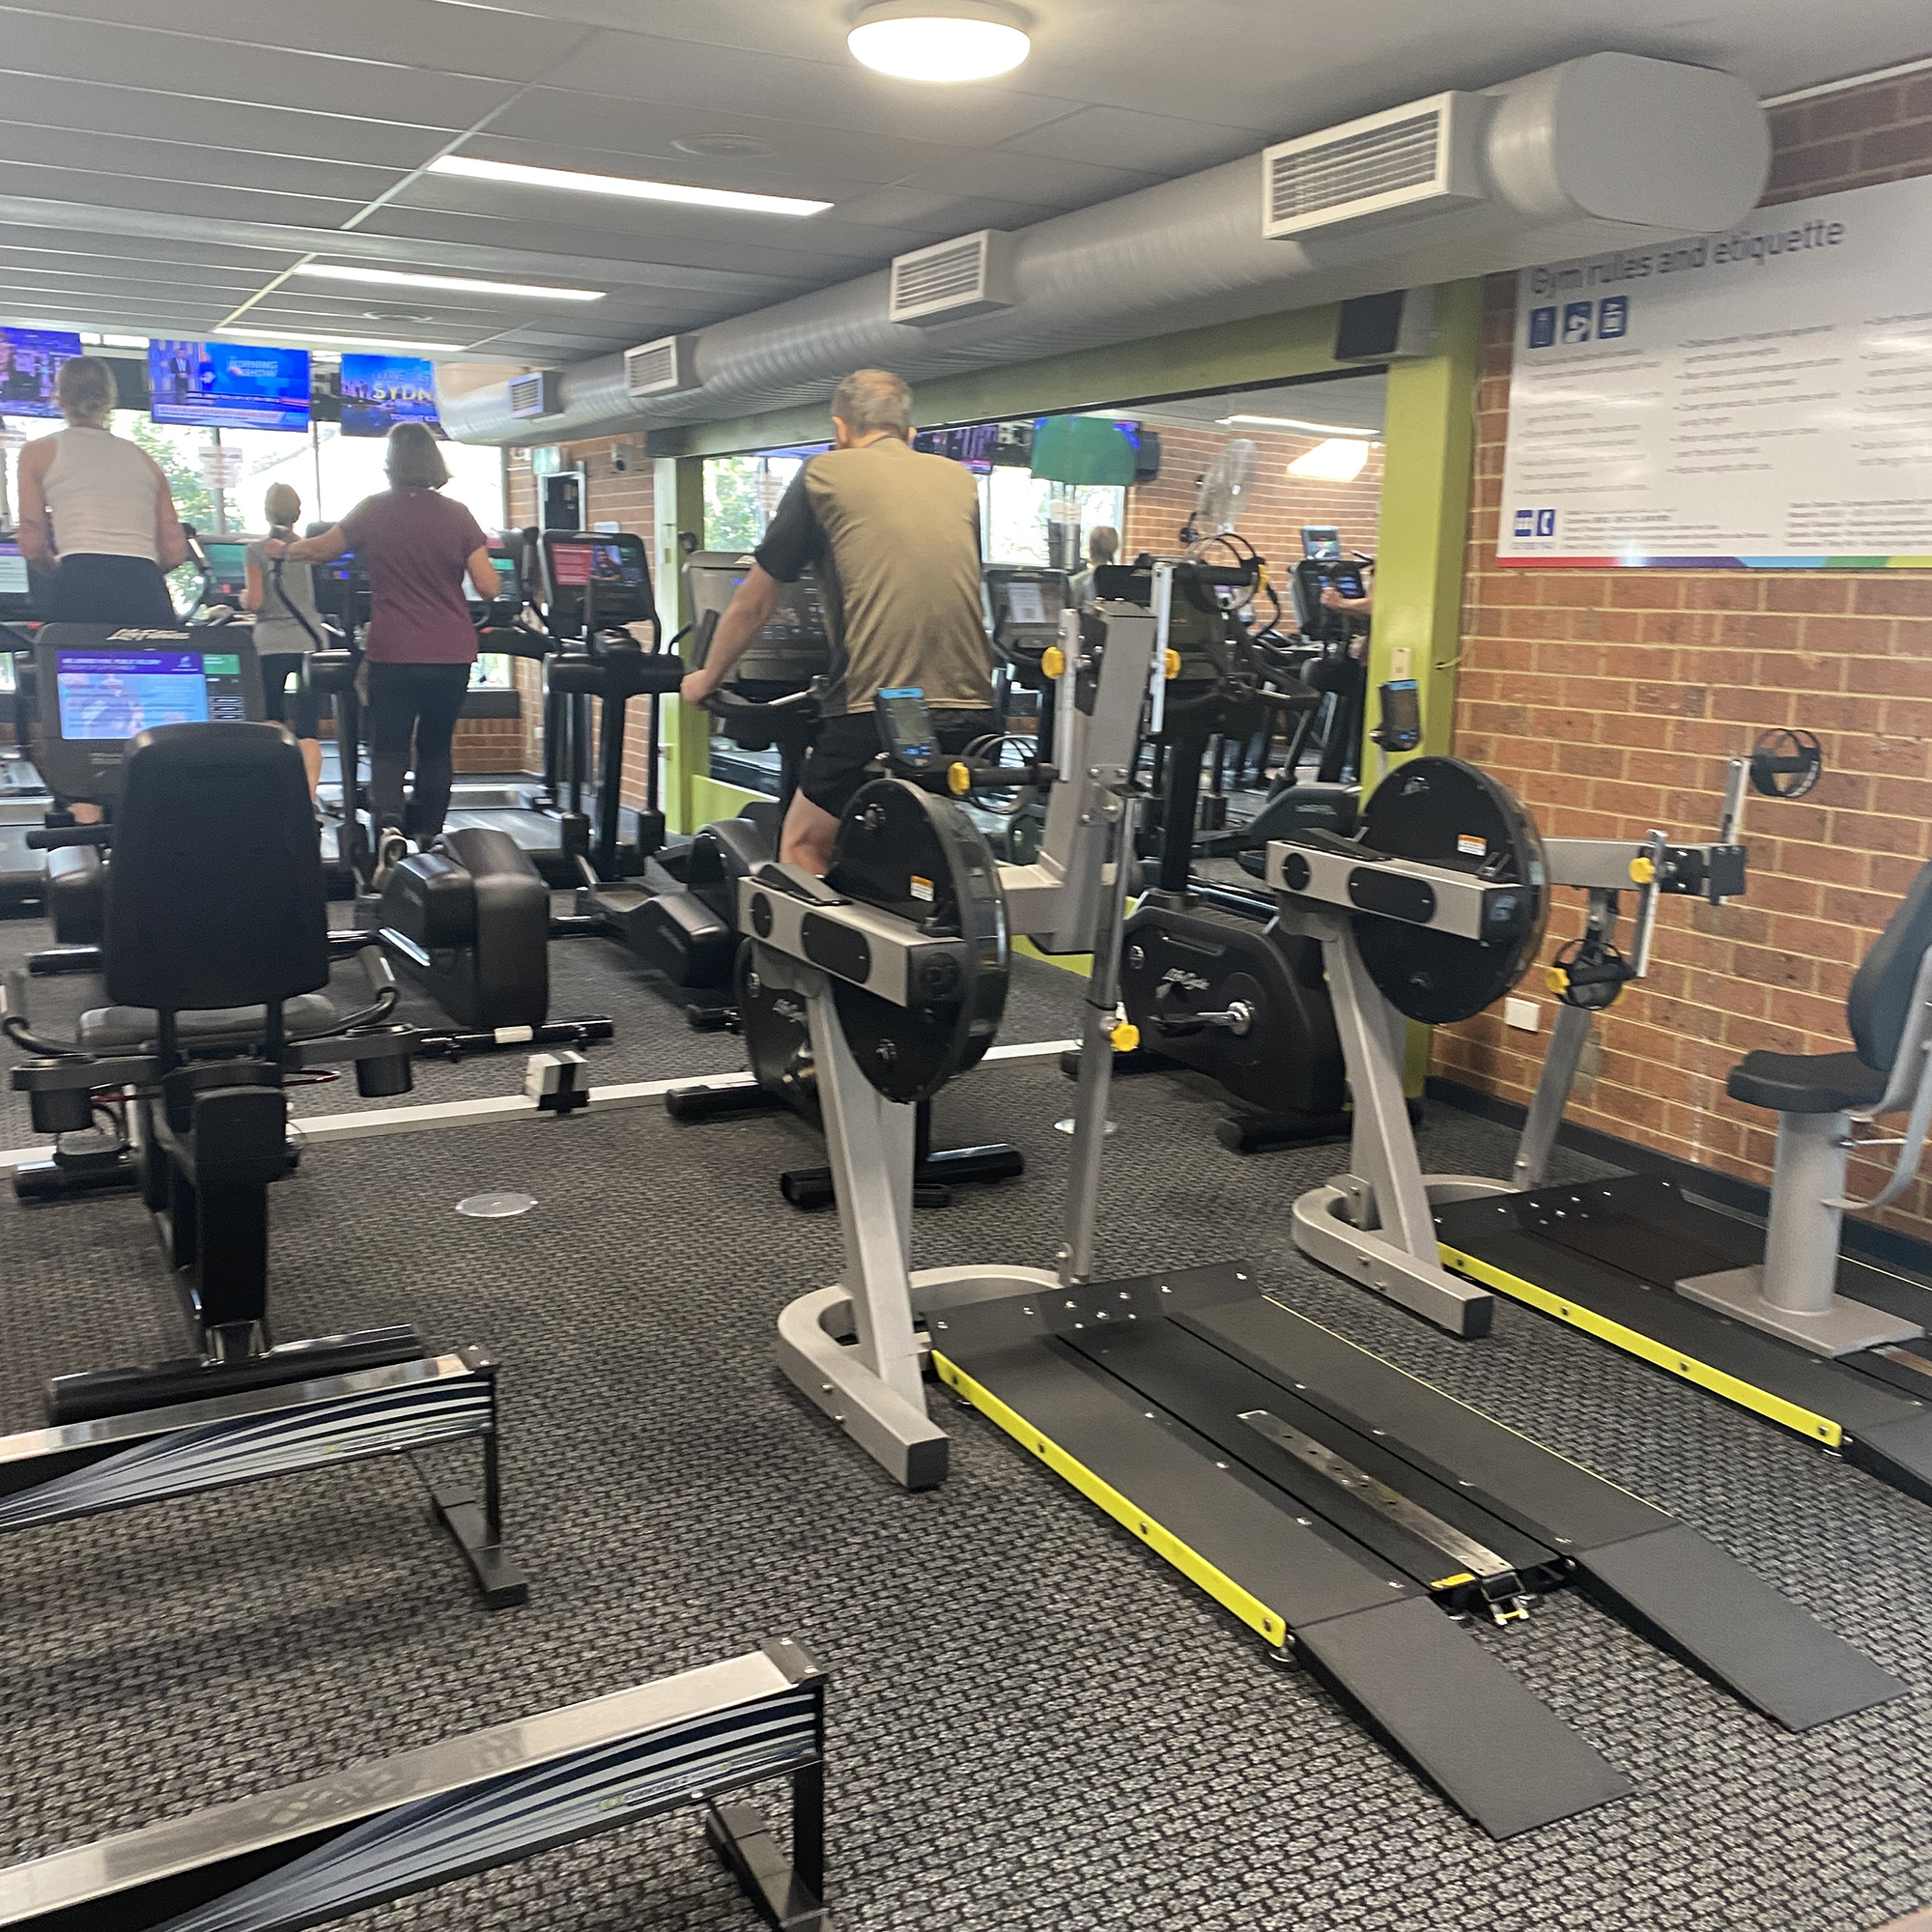 view of bikes and treadmills at collingwood leisure centre - keeping a fitness habit through a holiday exercise routine